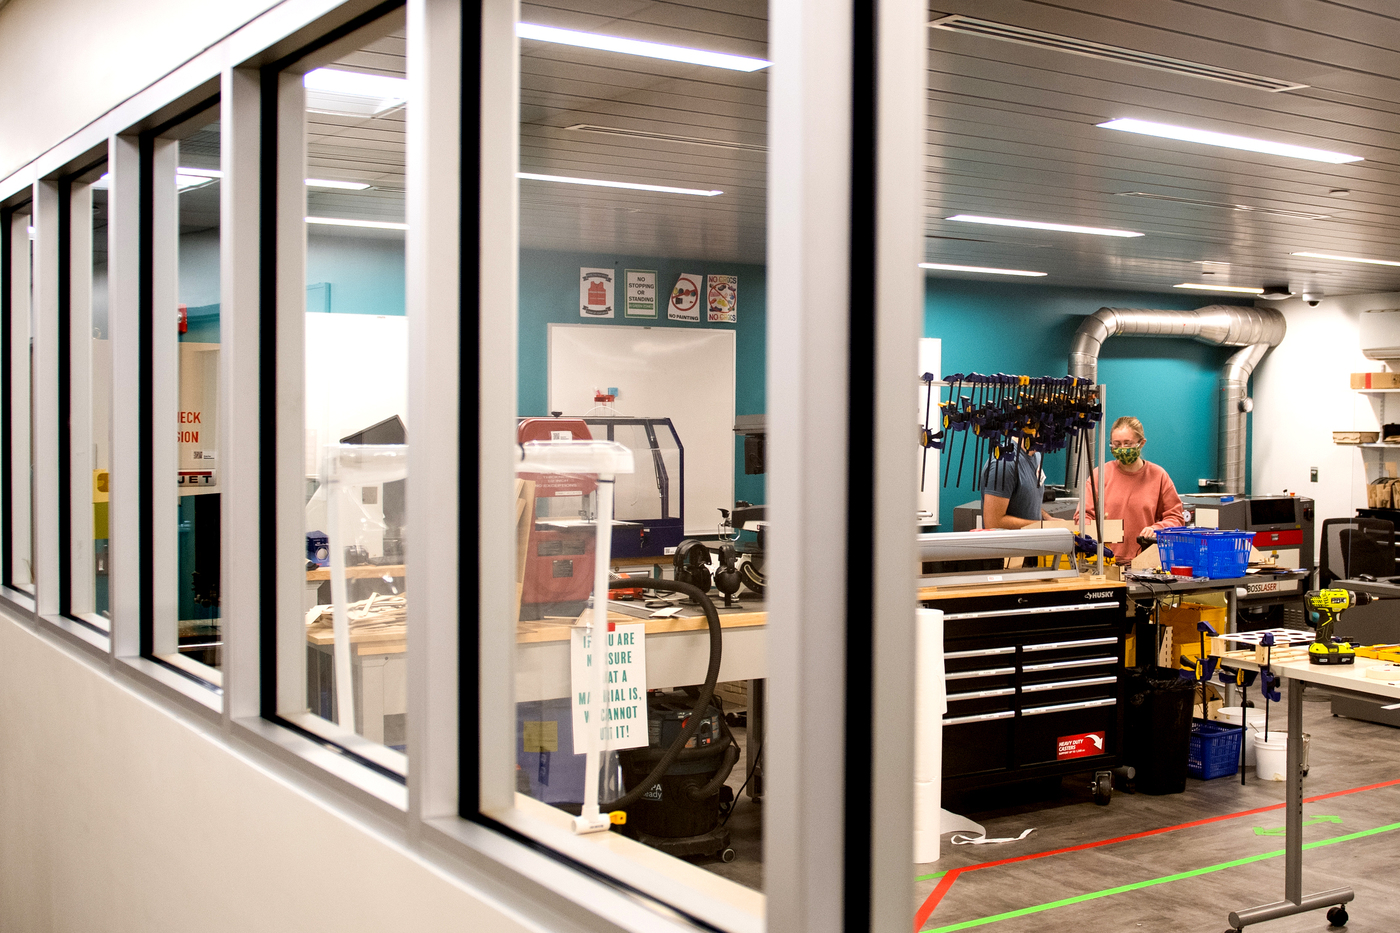 View of makerspace through windows